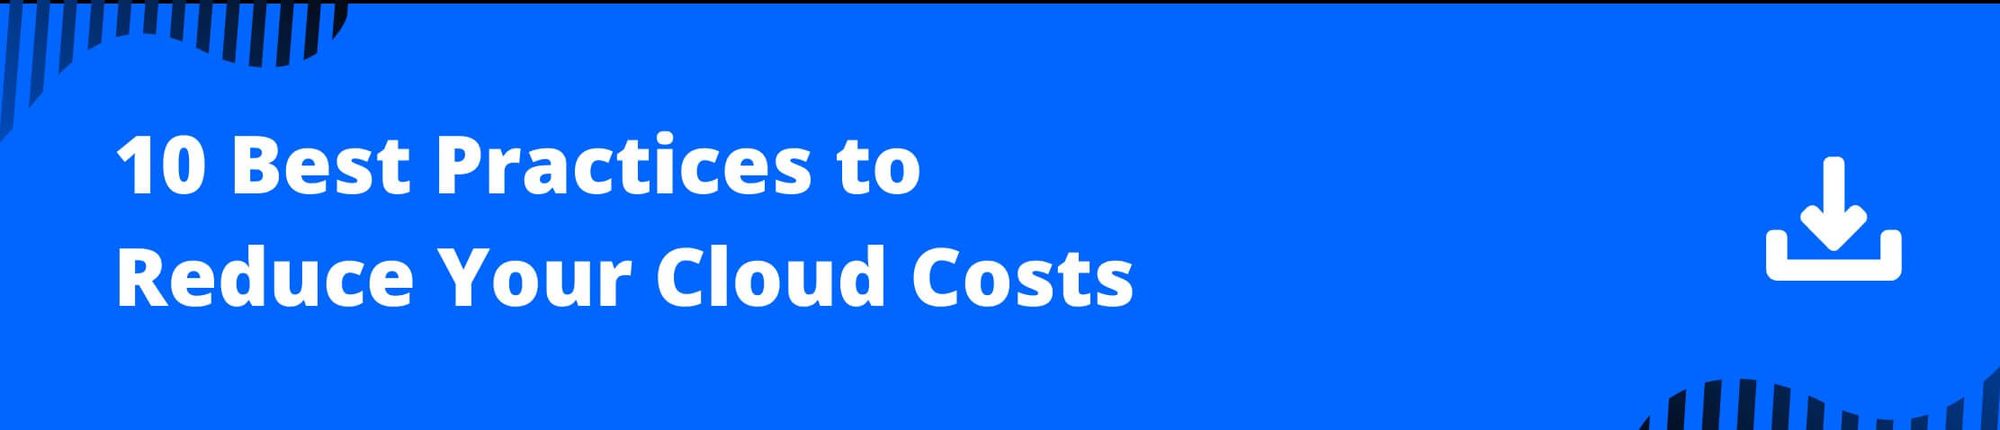 10 Best Practices to Reduce Your Cloud Costs